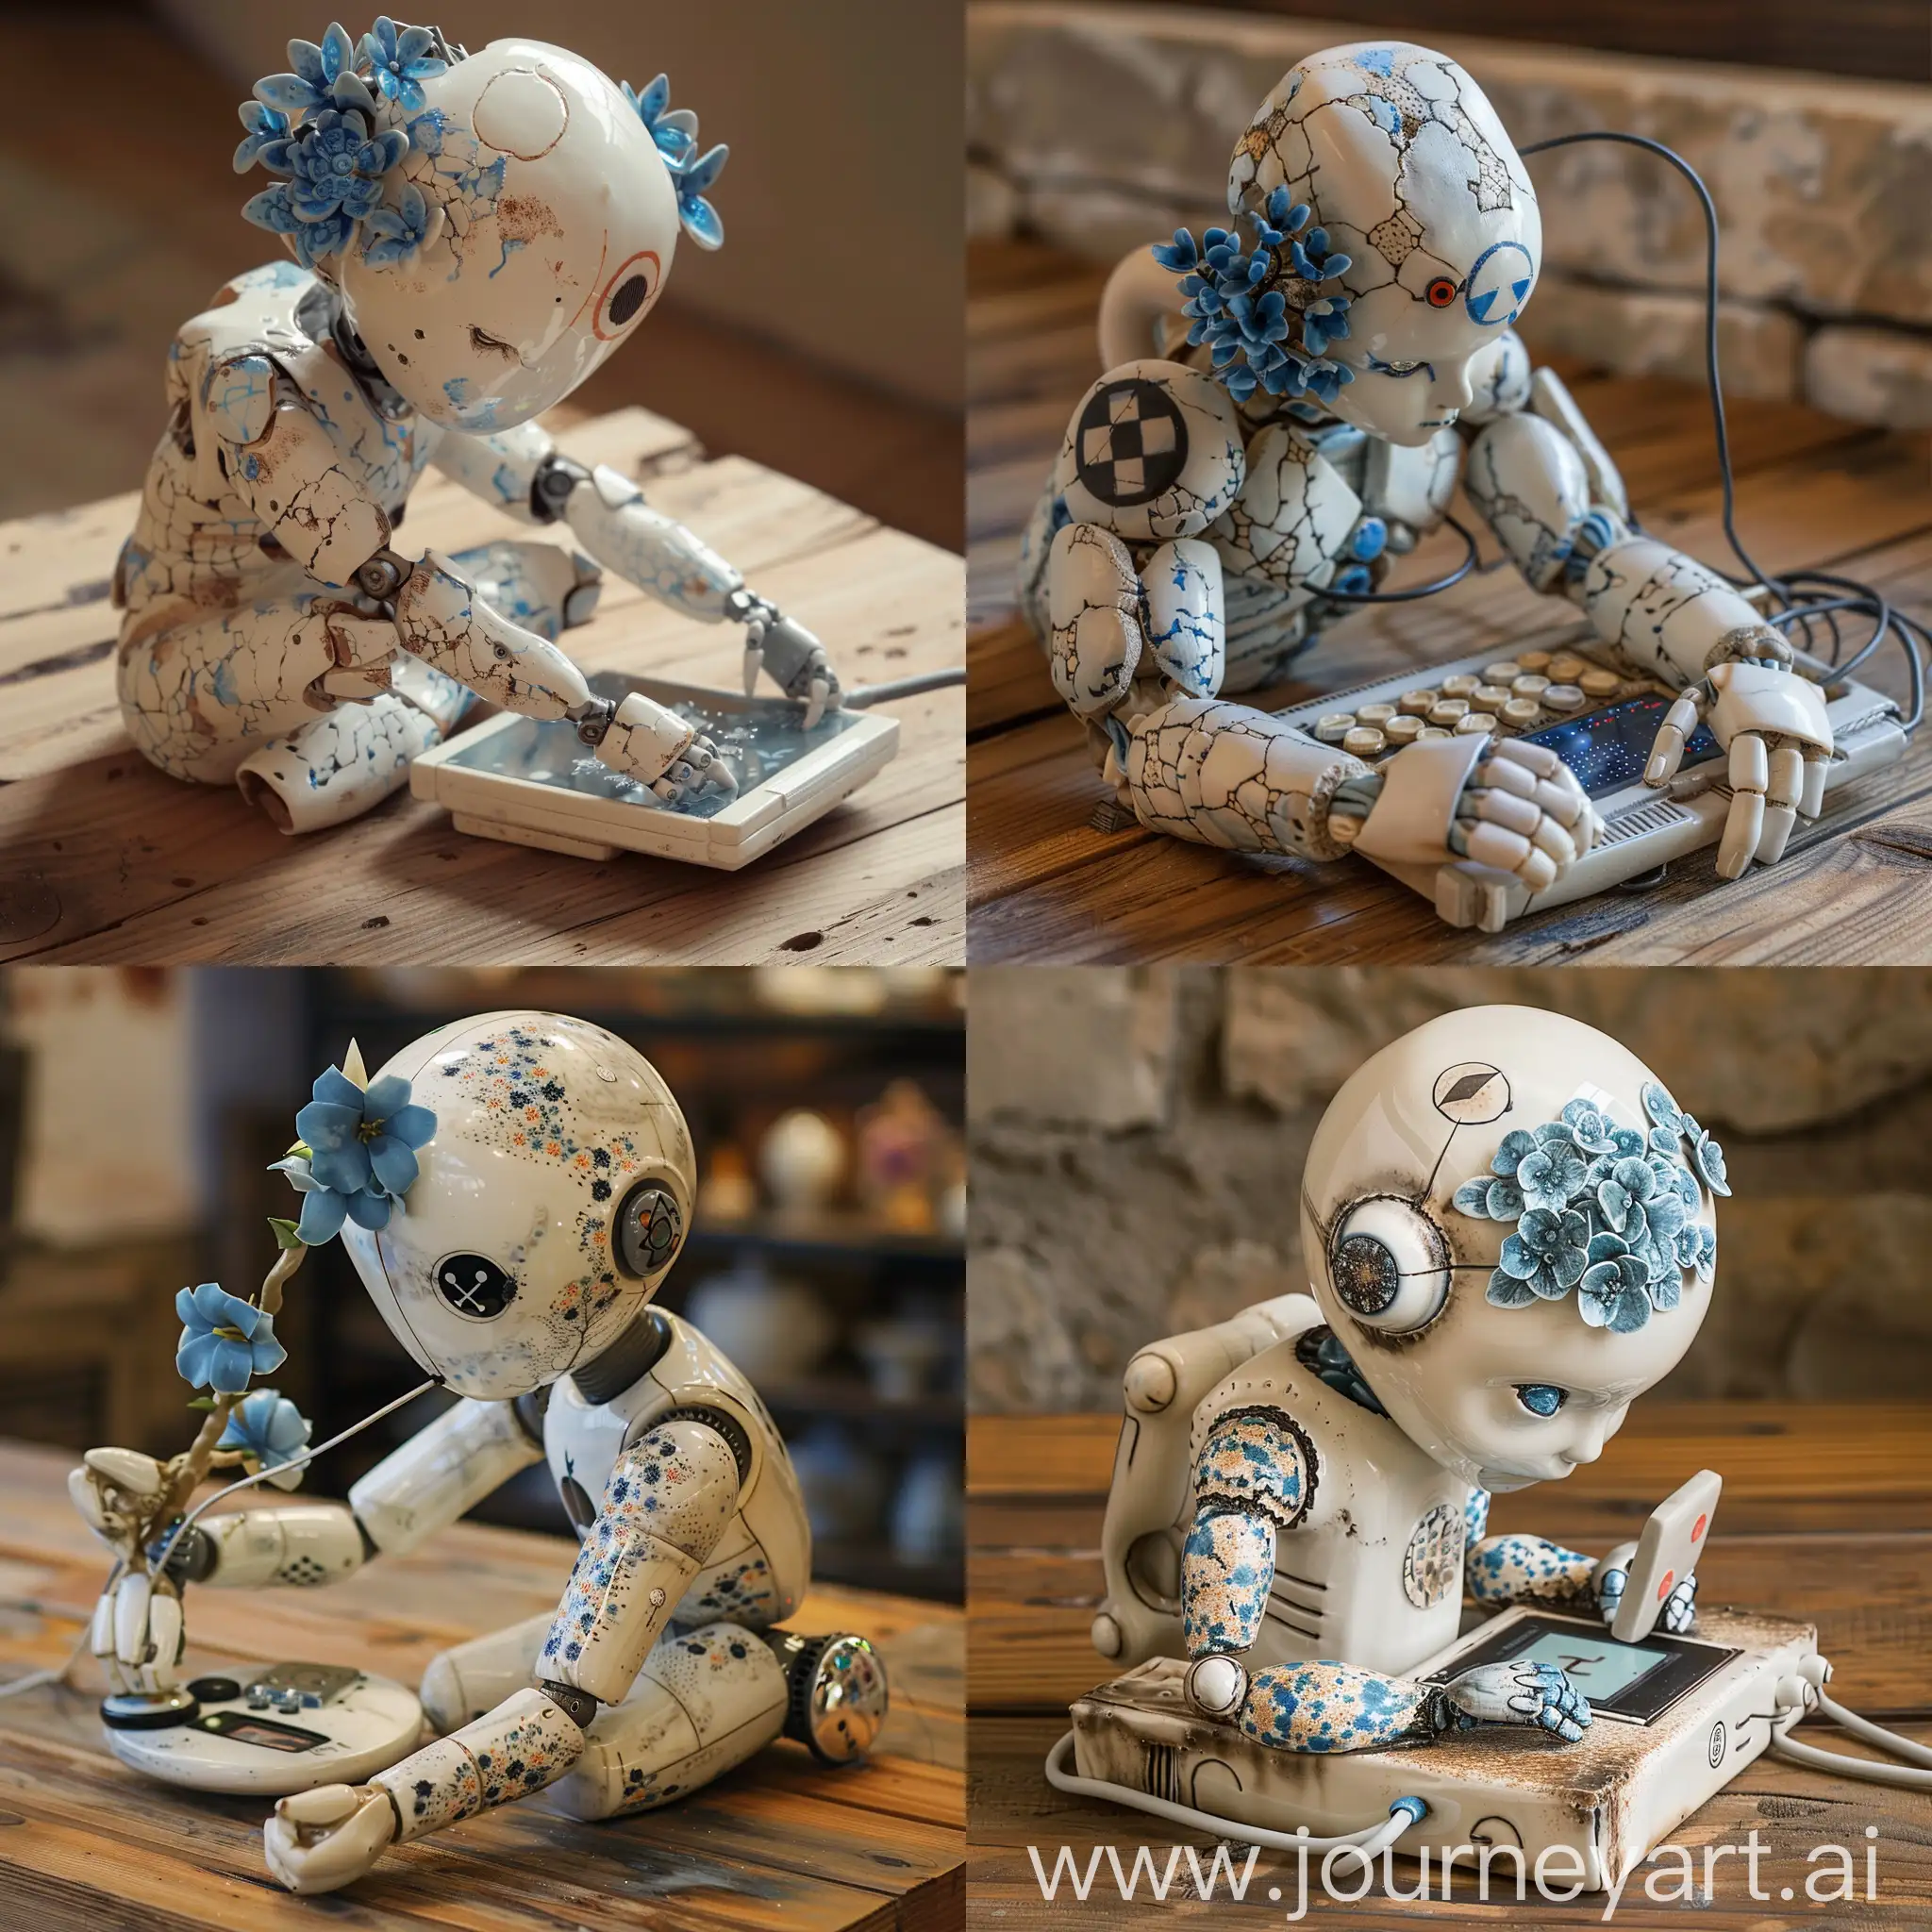 A ceramic and porcelain stone-faced digi humanoid robot with blue flowers and a target on the head working with a digi device on a wooden table.